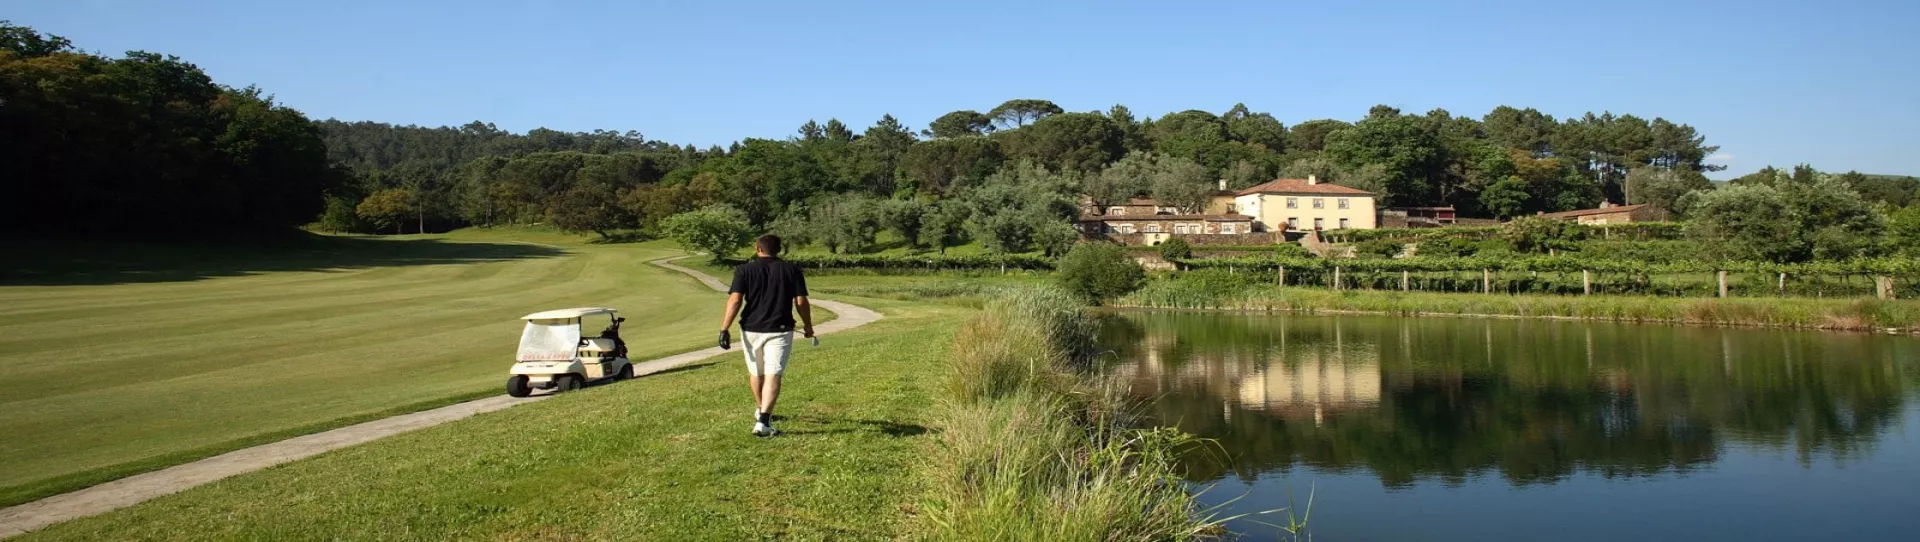 Portugal golf holidays - 7 Nights BB & 5 Days Unlimited Golf Rounds - Photo 1